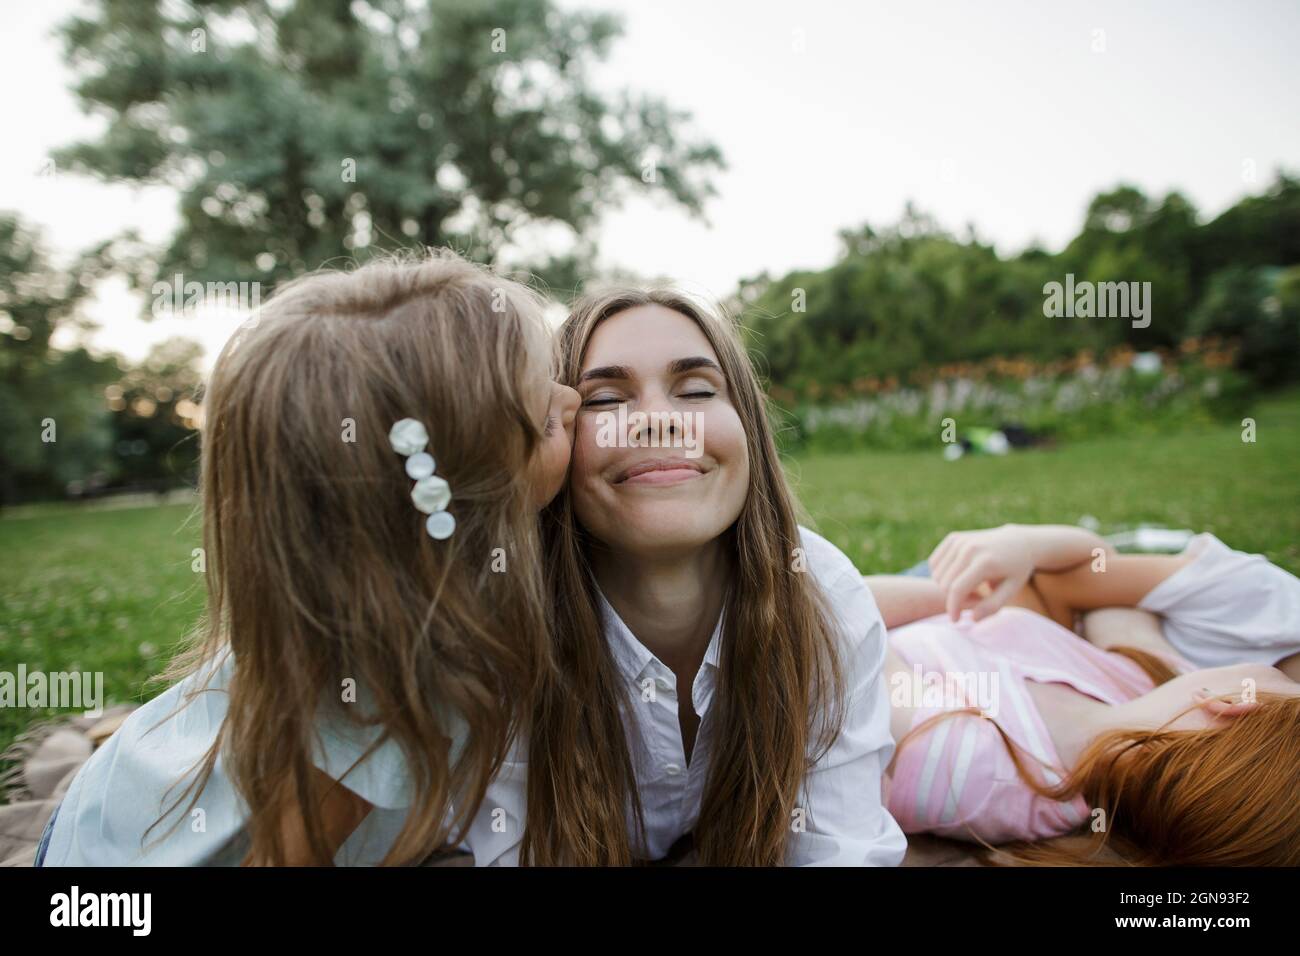 Girl kissing mother at public park Stock Photo